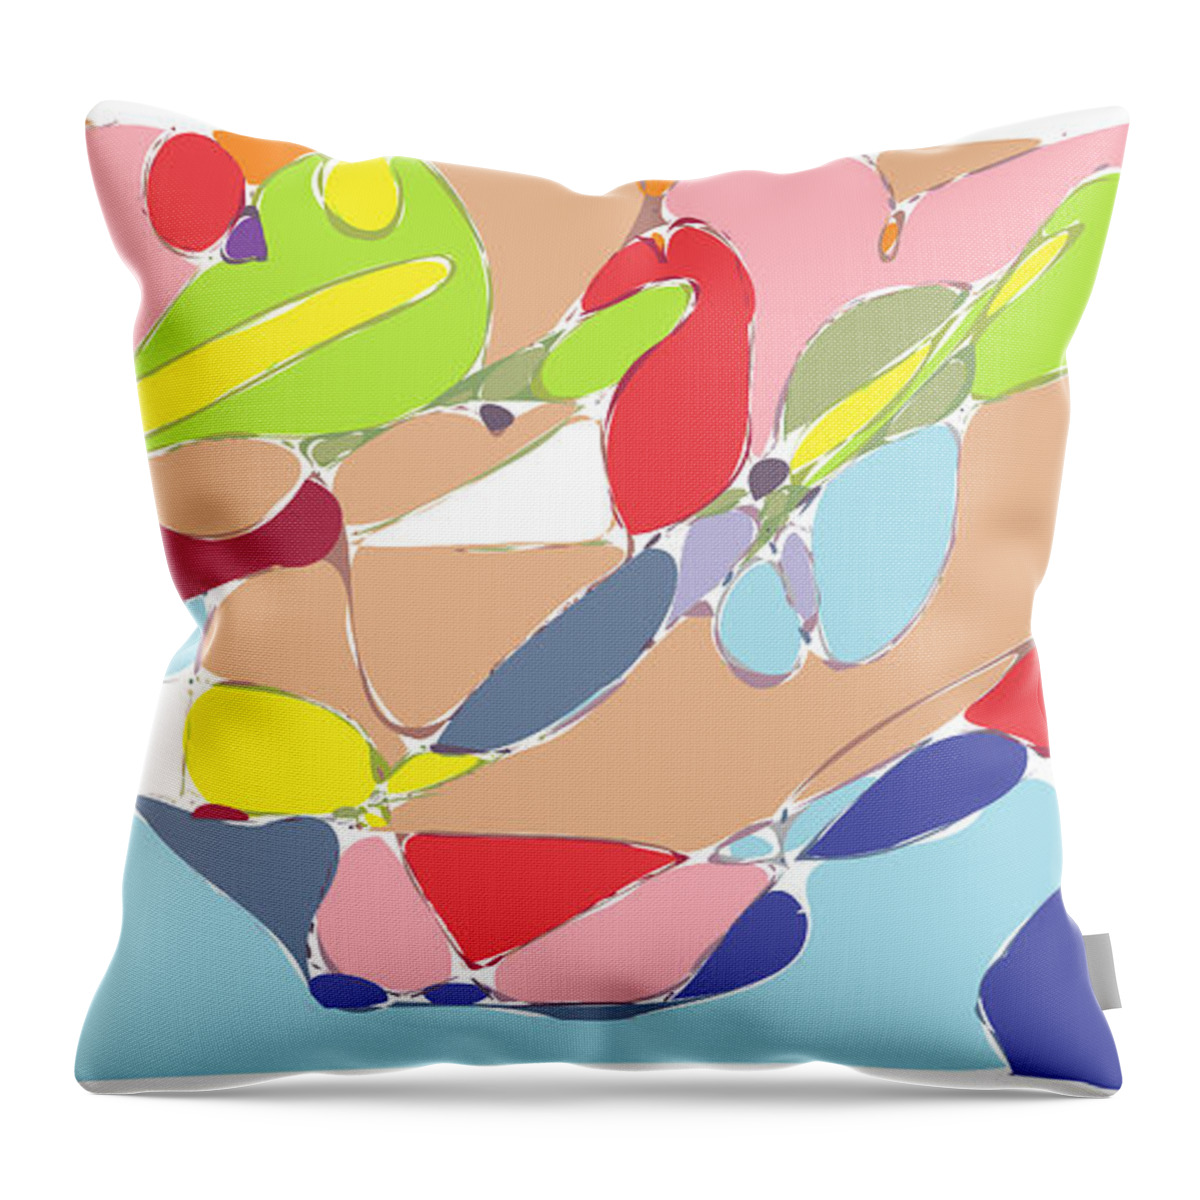 Abstract Throw Pillow featuring the digital art Abstract by Keshava Shukla